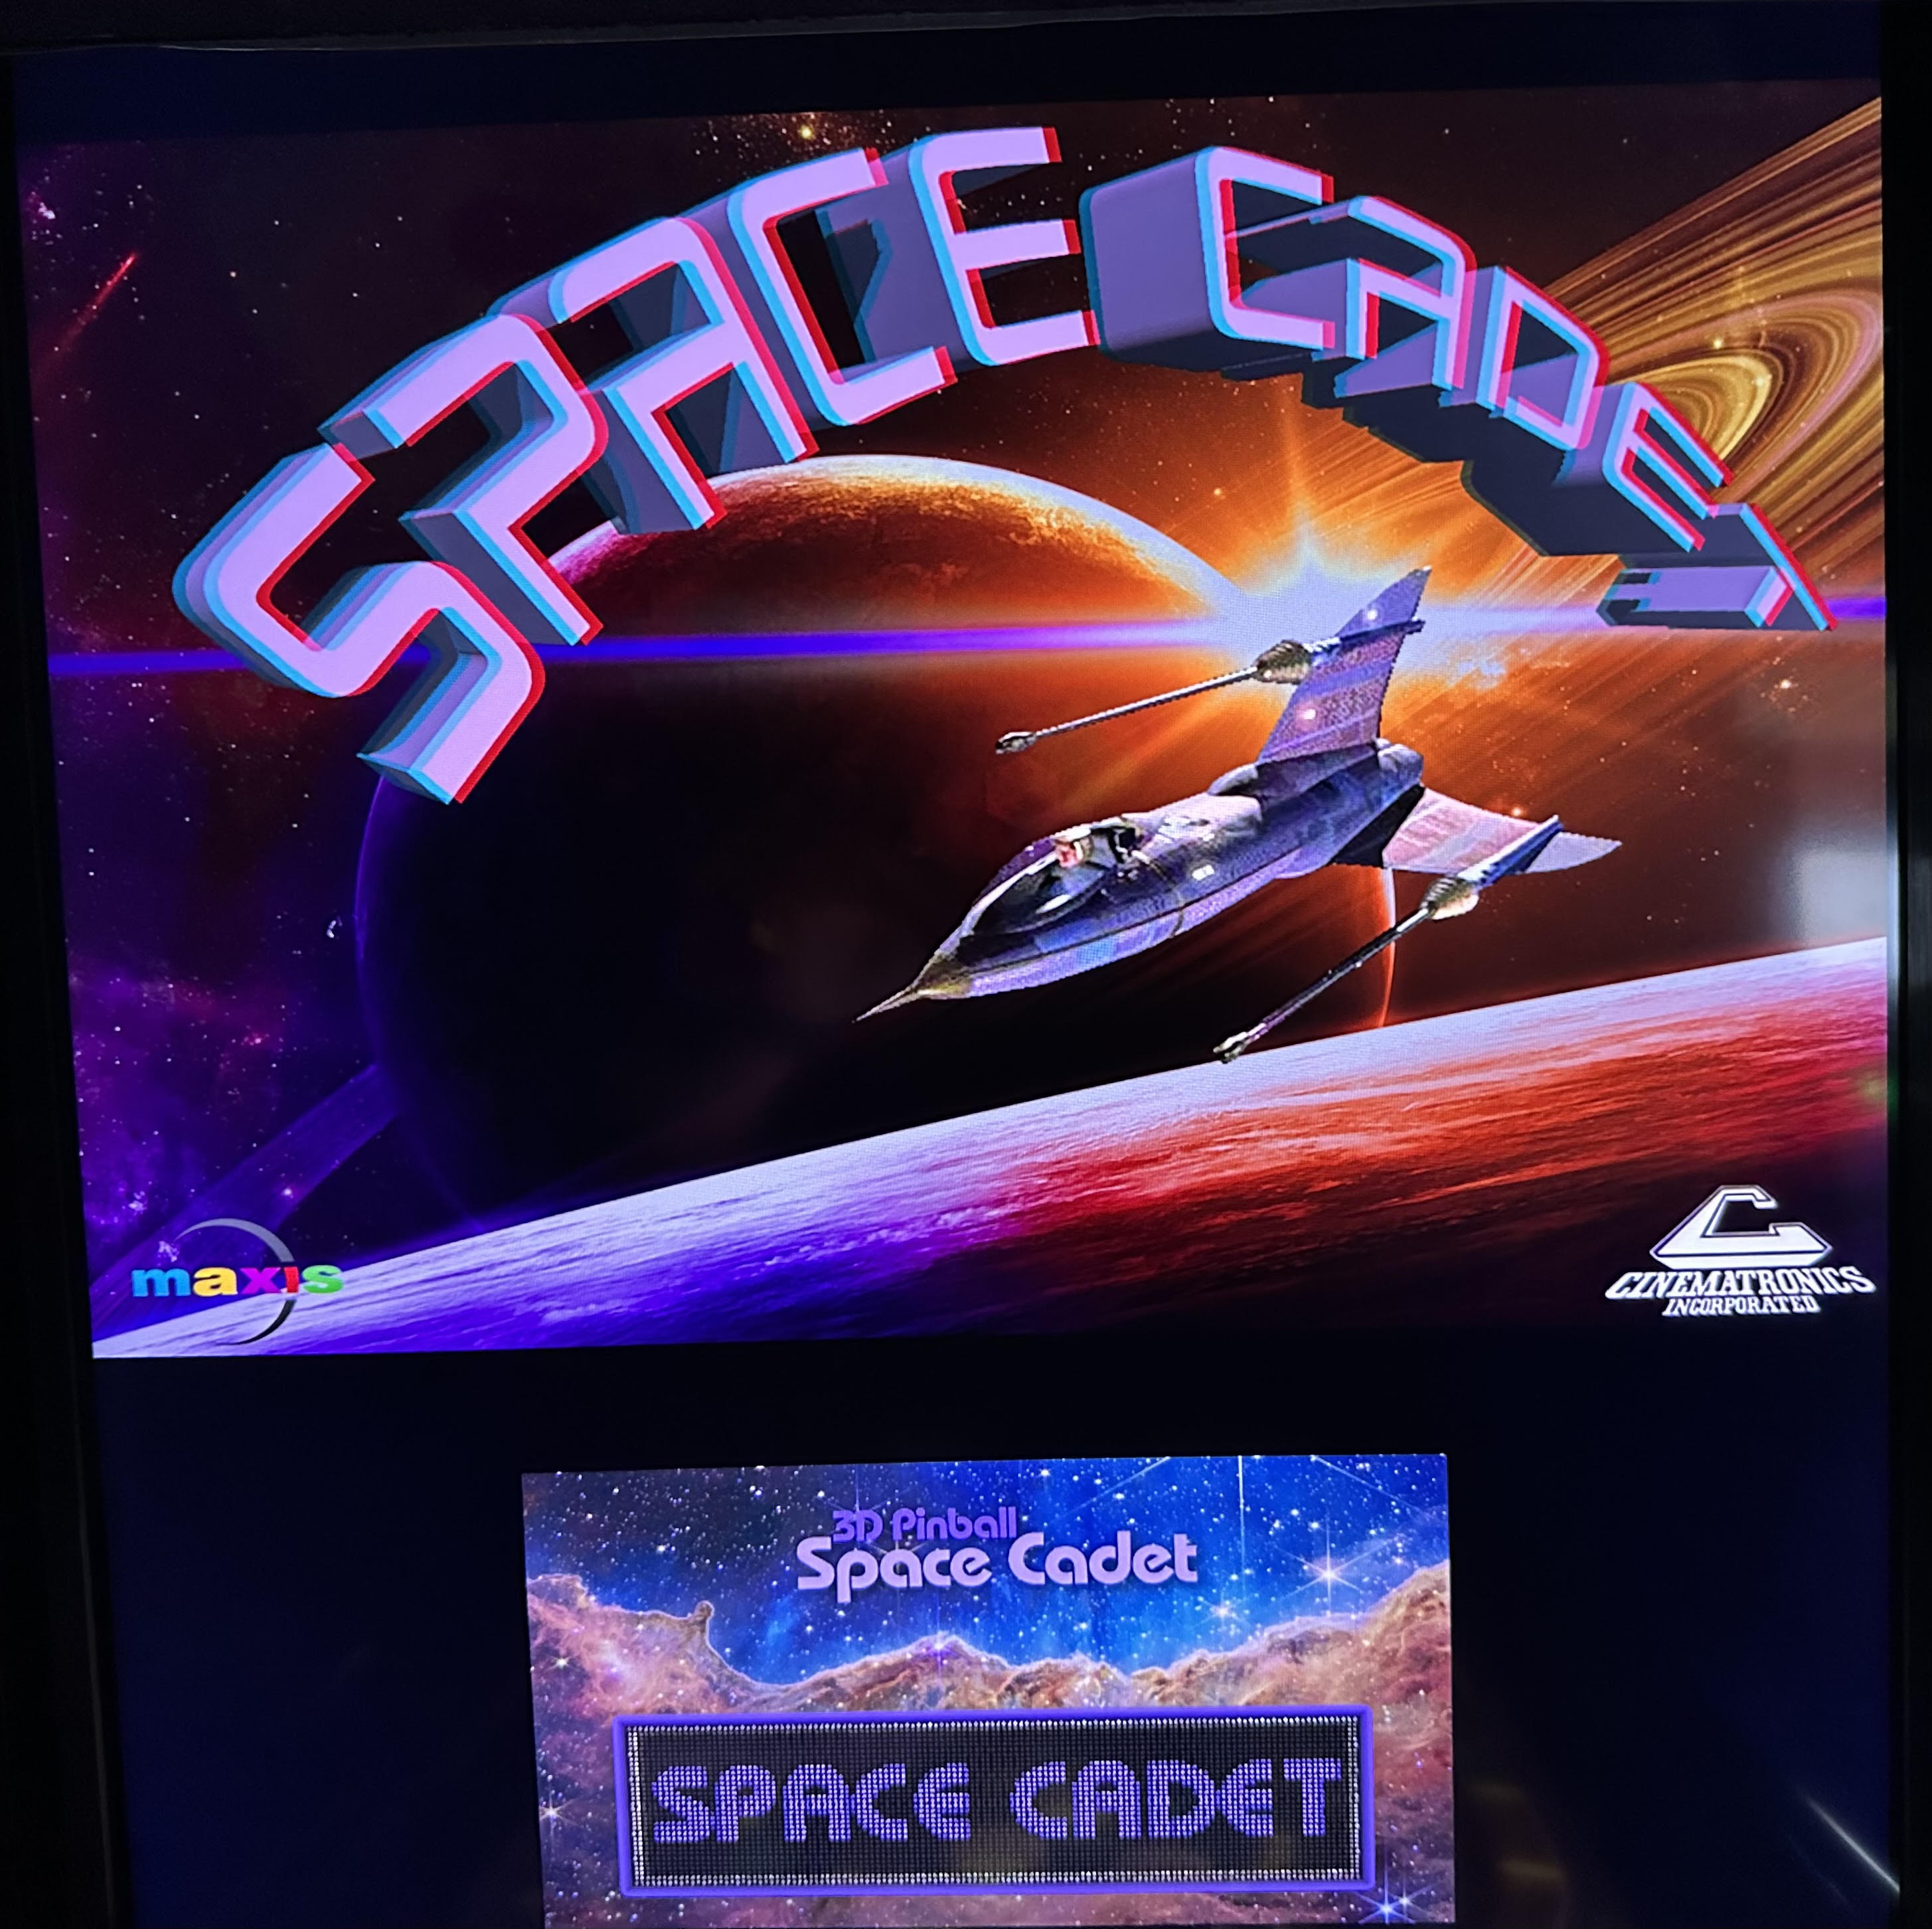 3D Pinball Space Cadet Poster for Sale by Cuttintees